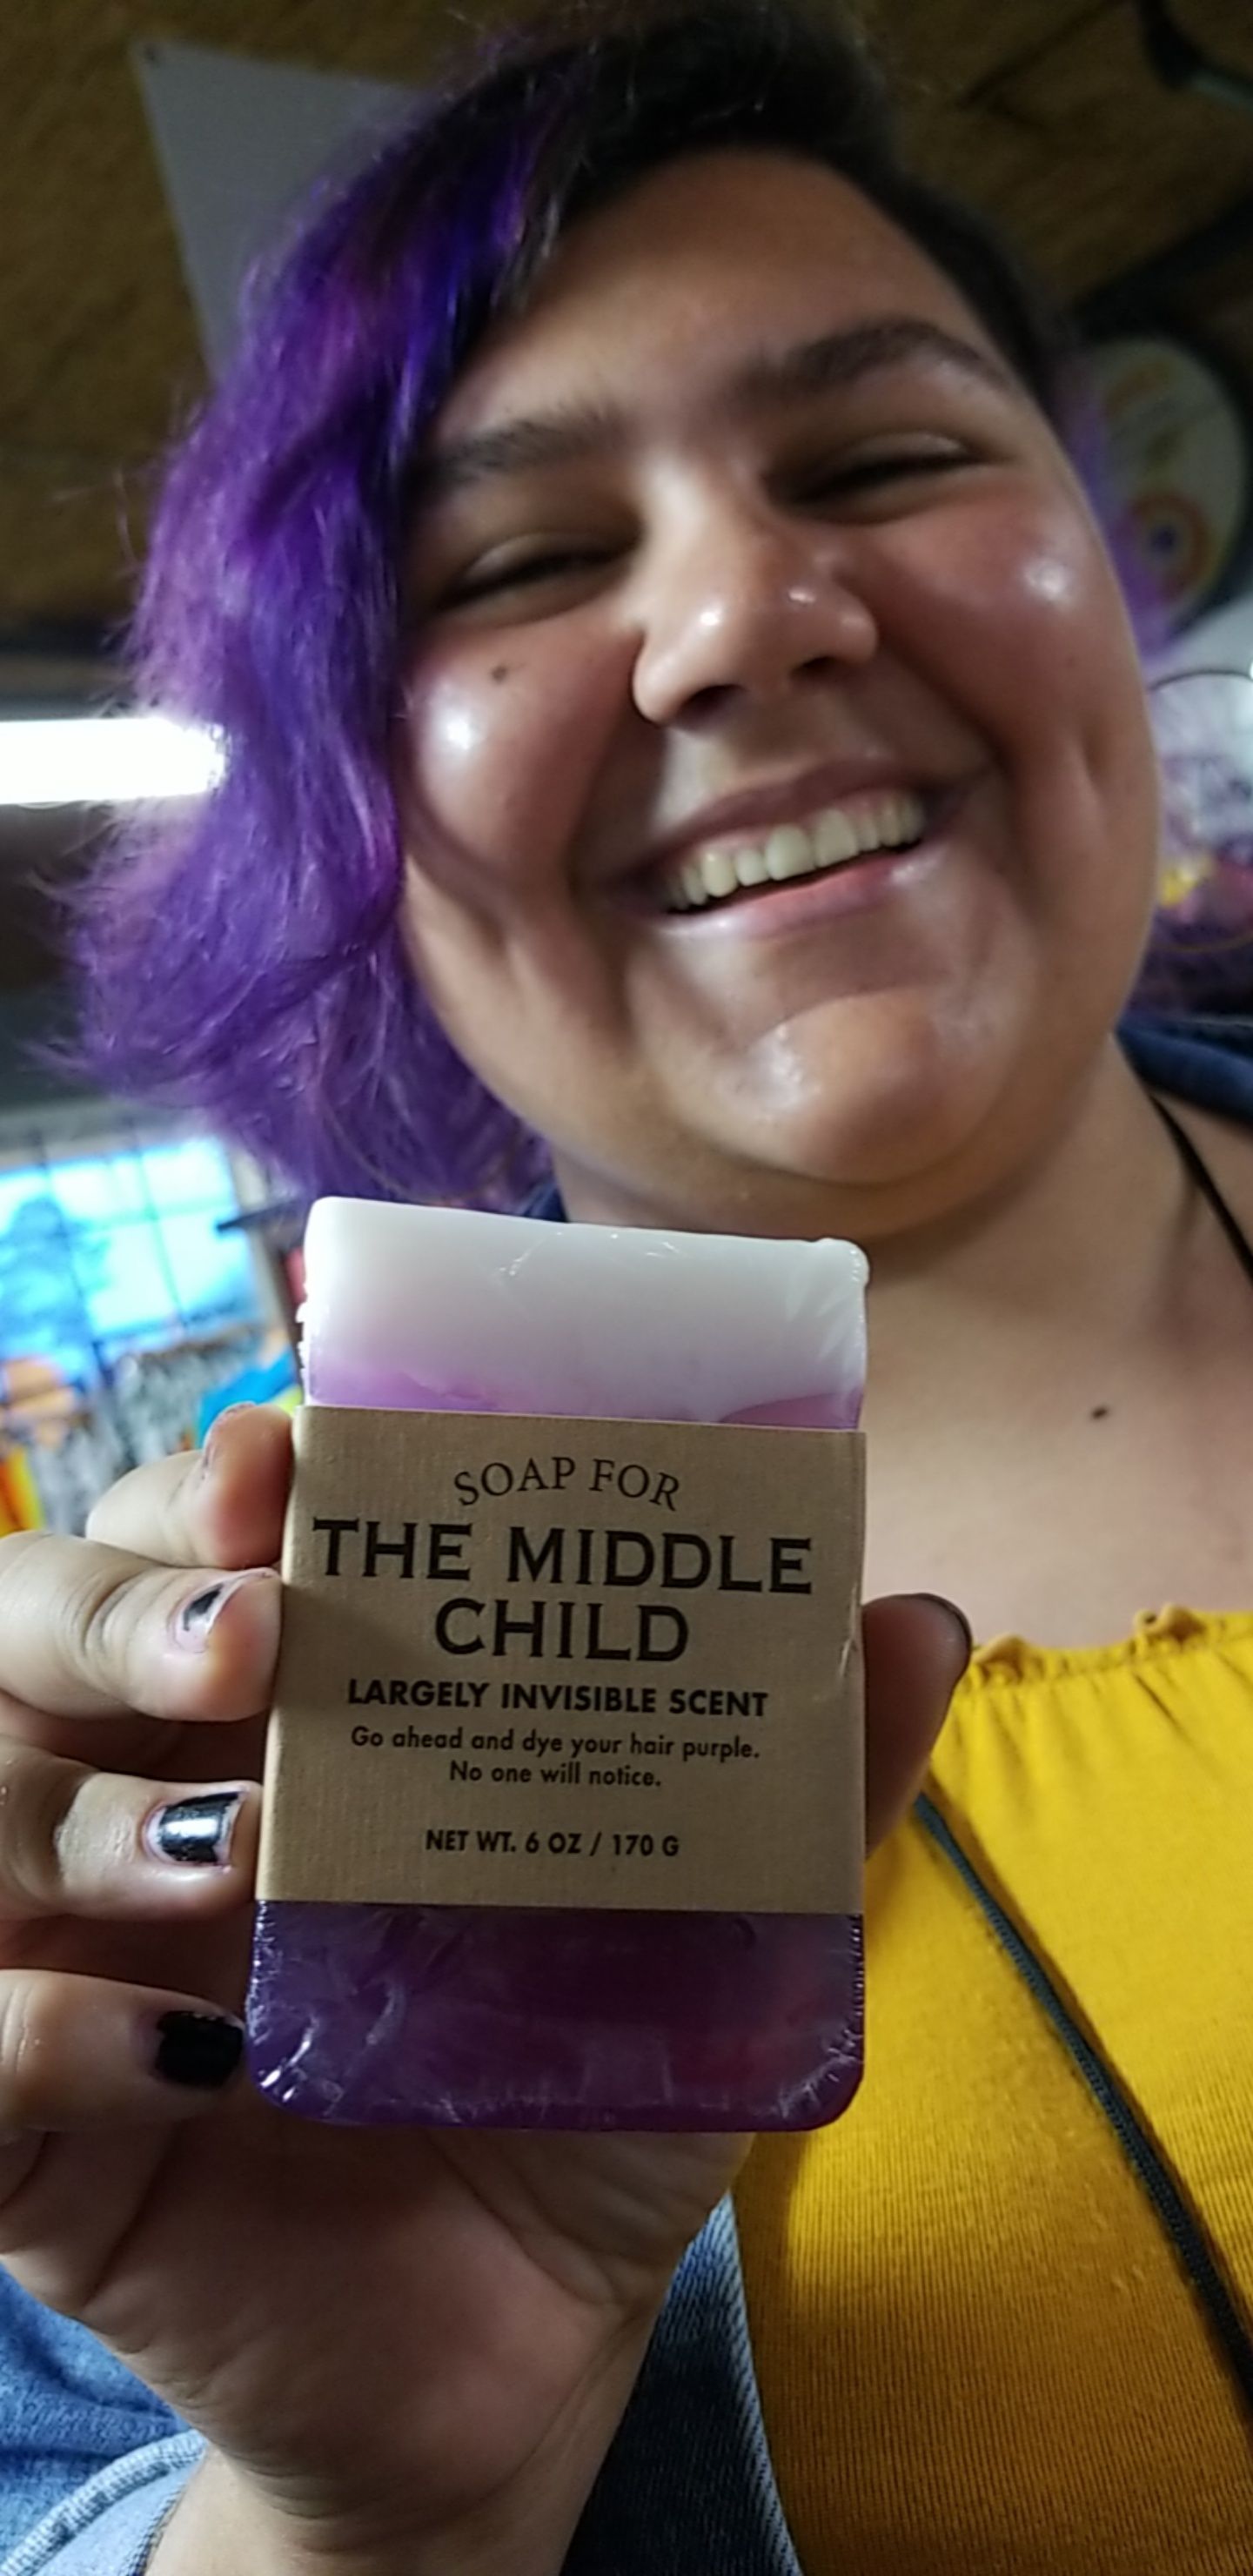 Gave this soap to my sister, the middle child, without reading the sentence under the title.